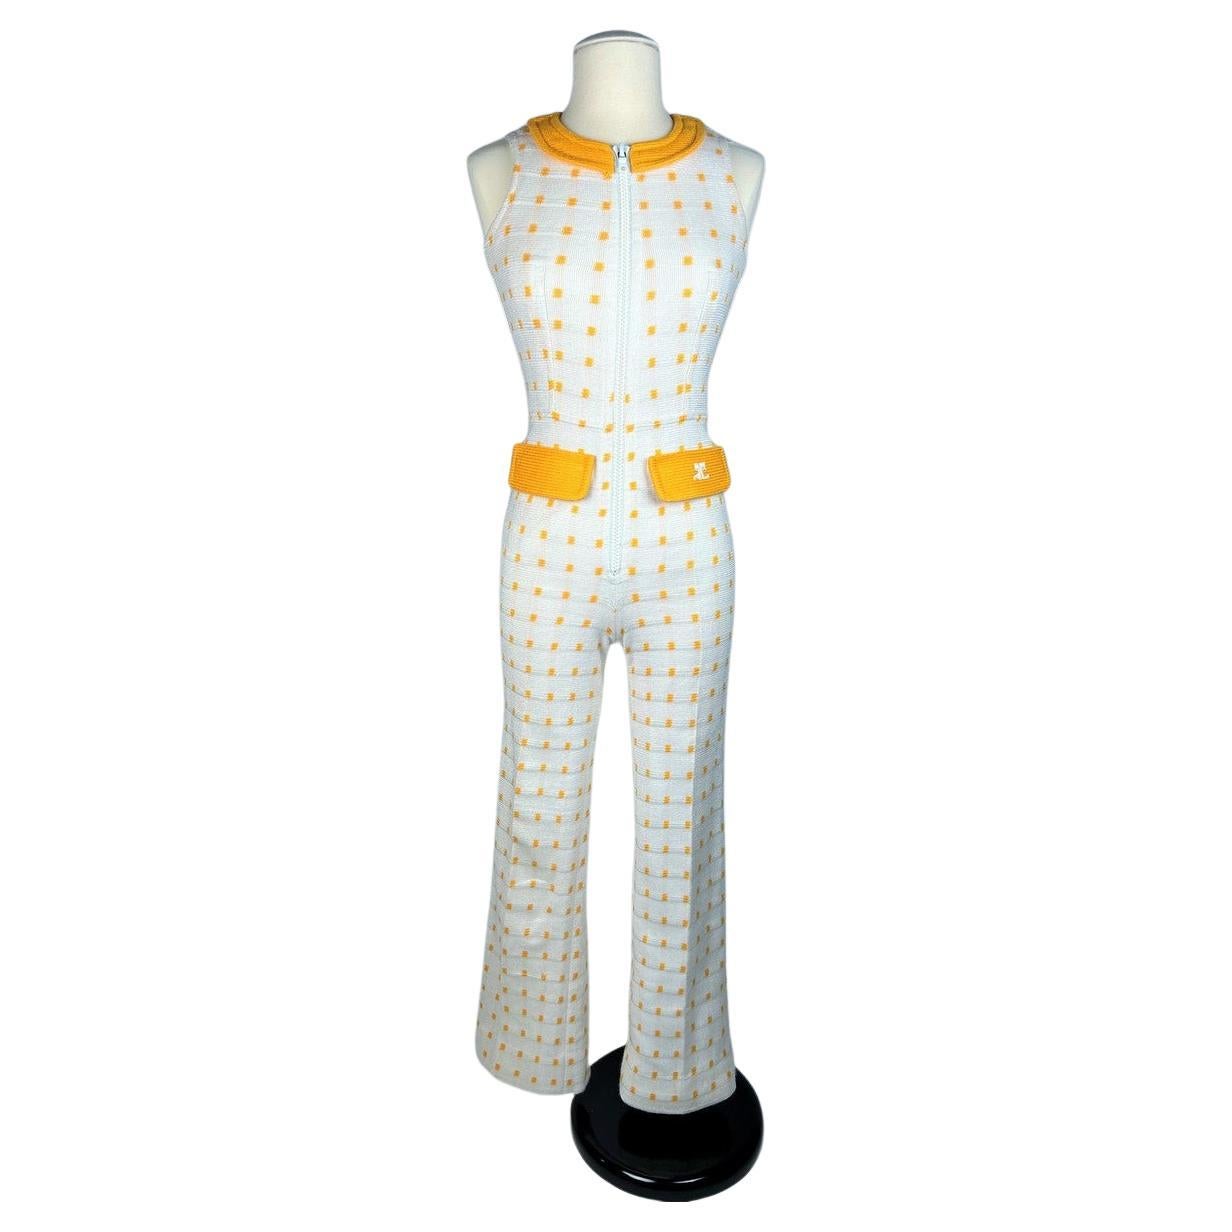 Circa 1970

France

An André Courrèges Hyperbole 00 Jumpsuit numbered 050237 dating from the early 1970s. Made from white wool knit with small orange-yellow checks, this jumpsuit is sleeveless, with a round collar fastened by a white plastic zip at